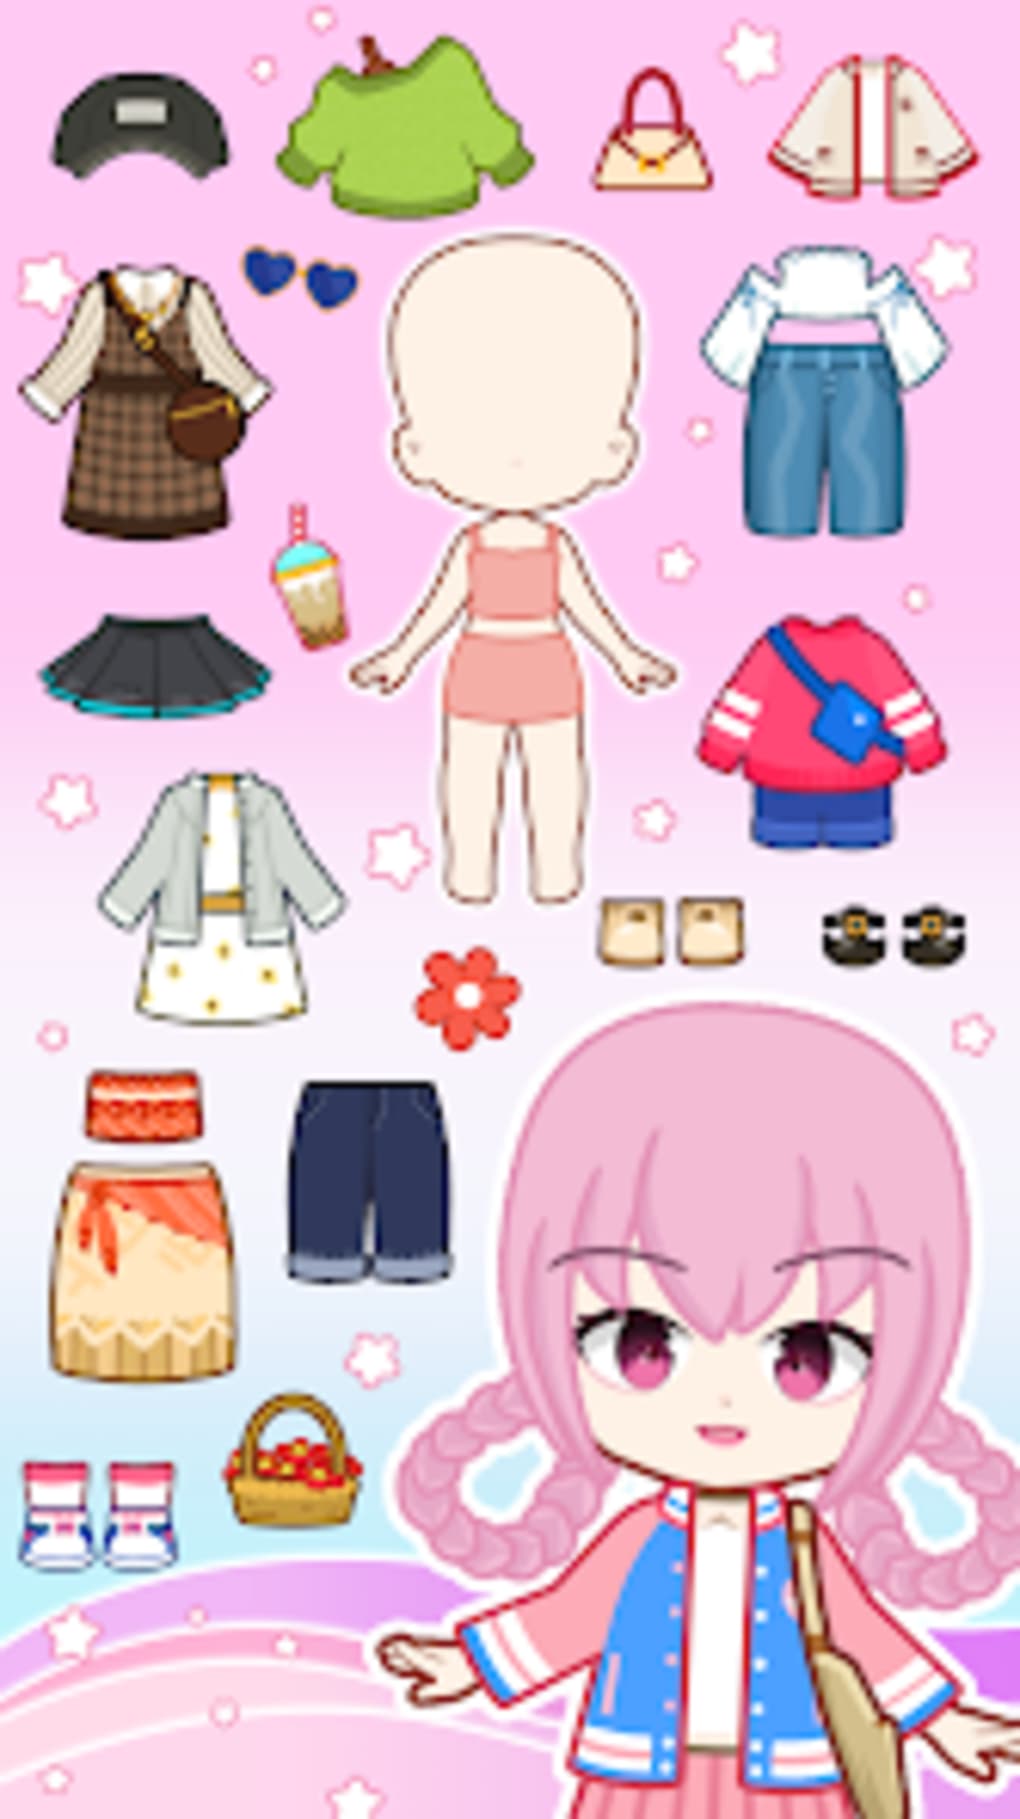 Play Doll Dress Up: Sweet Girl Online for Free on PC & Mobile